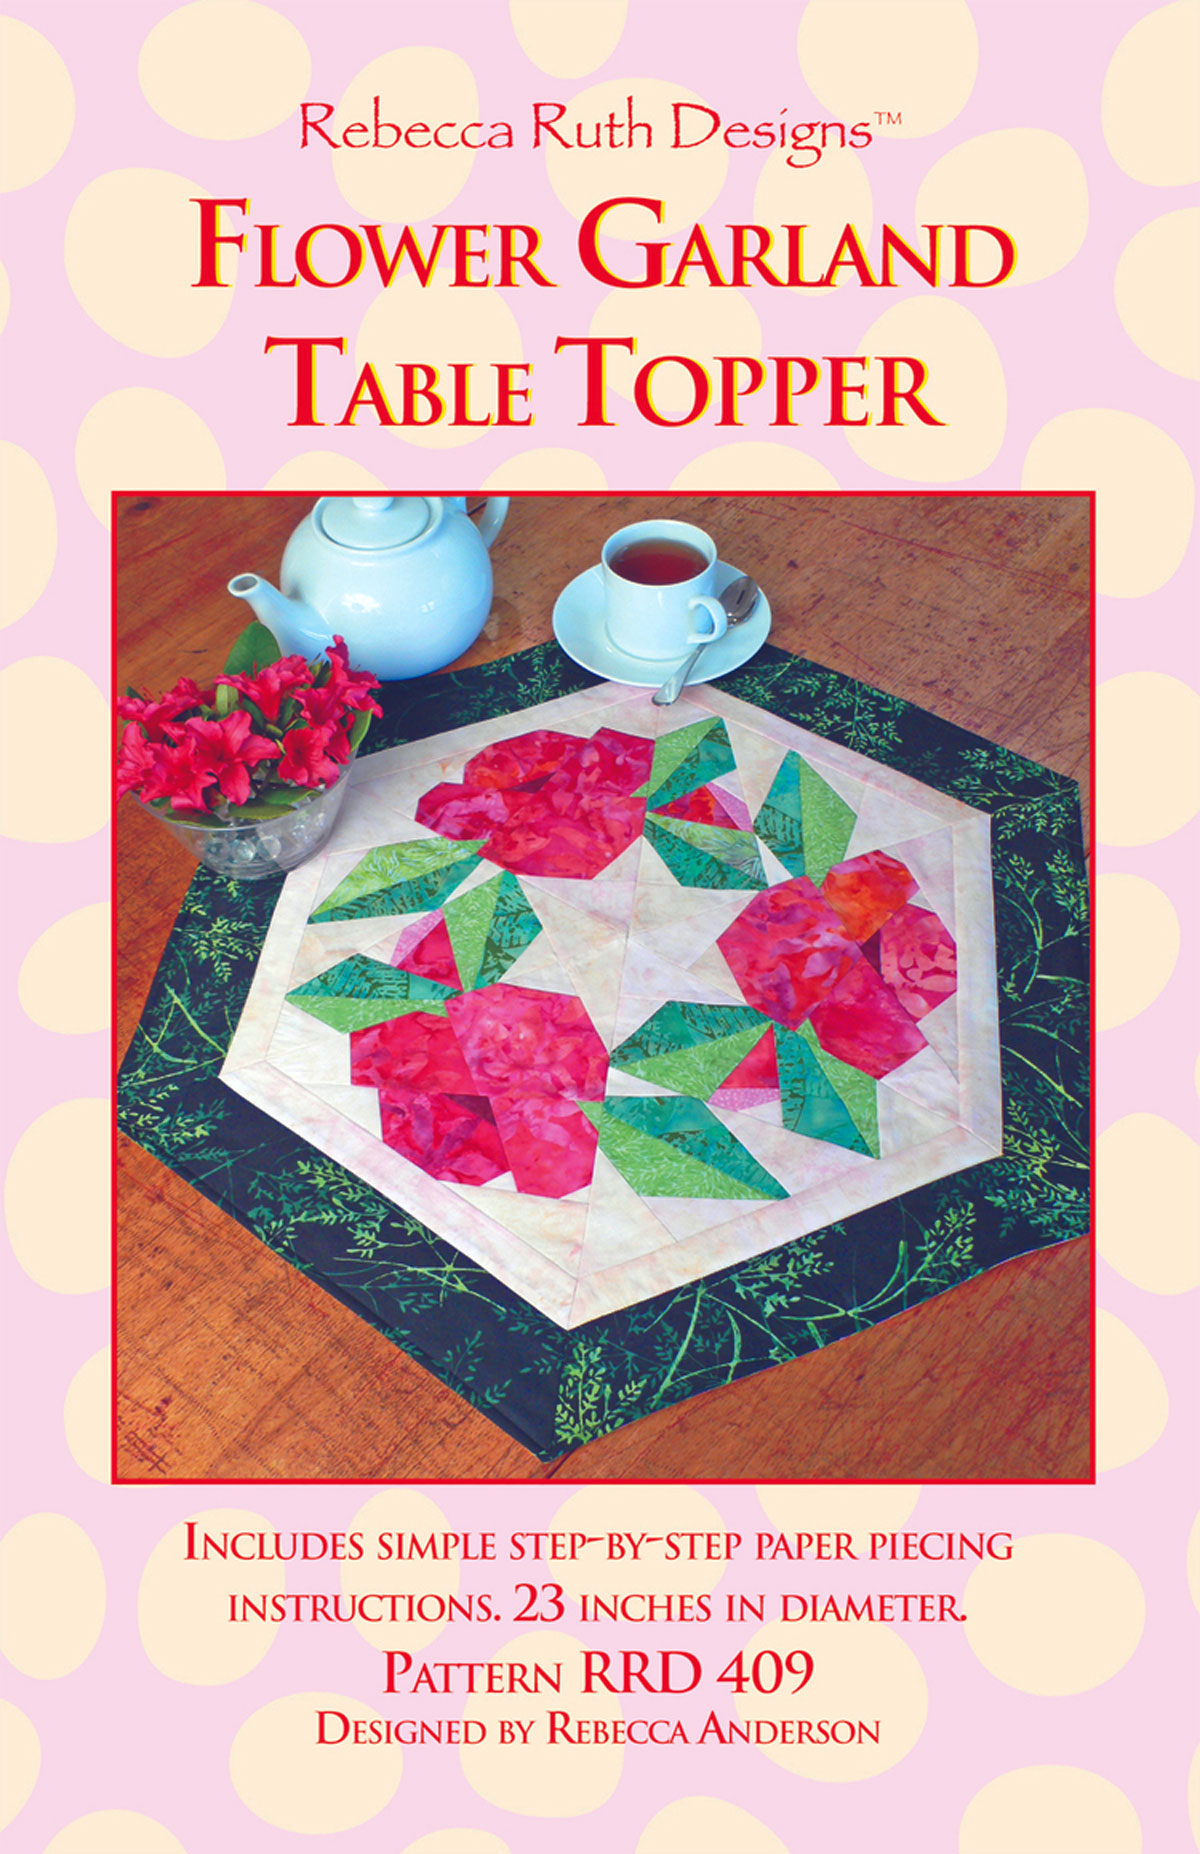 Flower-Garland-table-topper-sewing-pattern-rebecca-ruth-designs-front